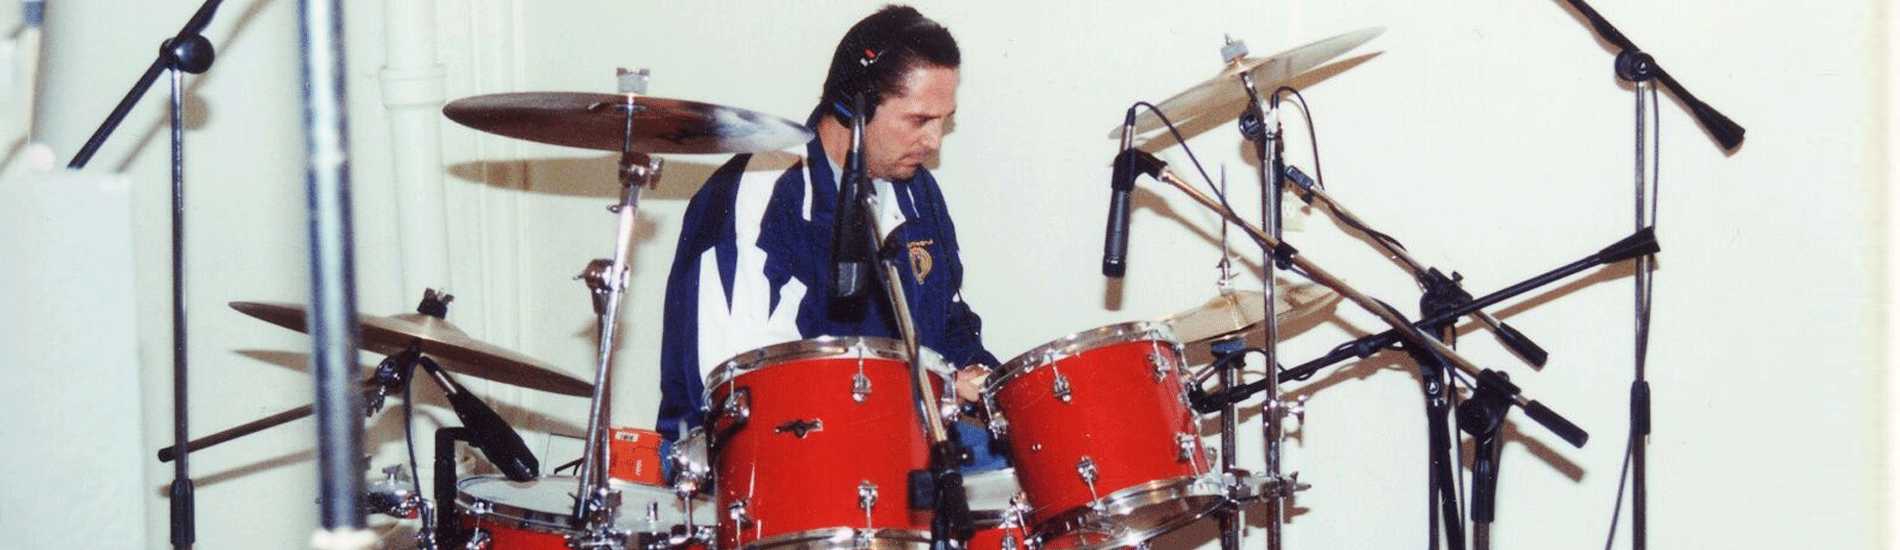 A Drummer Playing Drums in the Studio